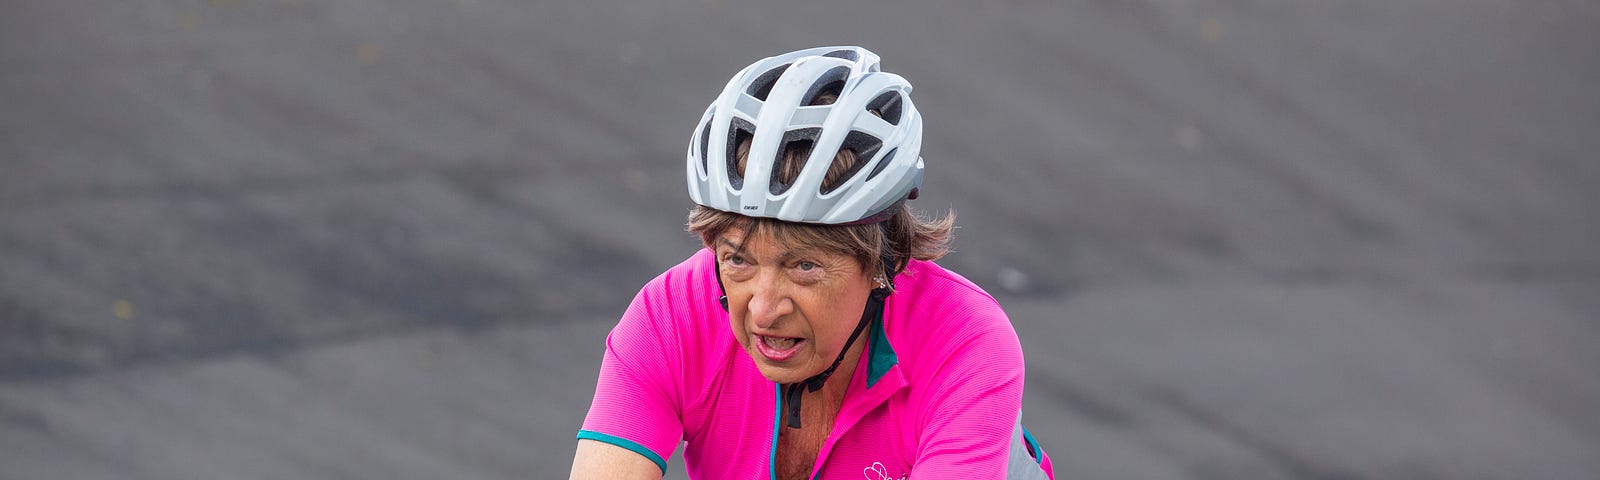 Michaela is cycling. She wears a pink cycling top, black shorts and a helmet as she rides round a track.